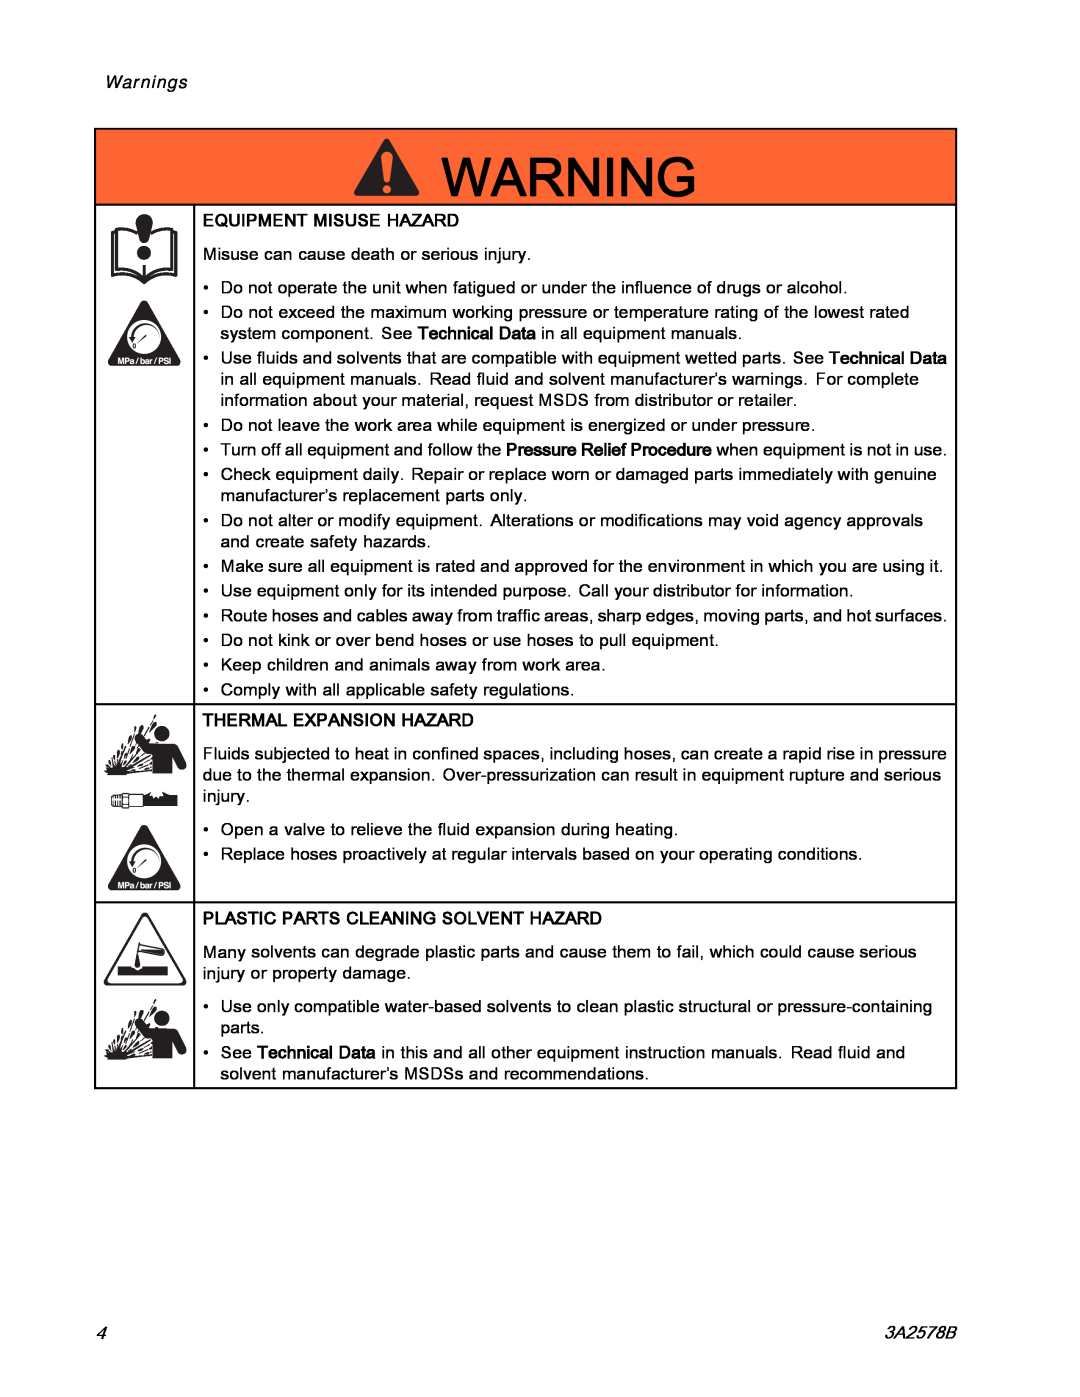 Graco 3A2578B Warnings, Equipment Misuse Hazard, Thermal Expansion Hazard, Plastic Parts Cleaning Solvent Hazard 